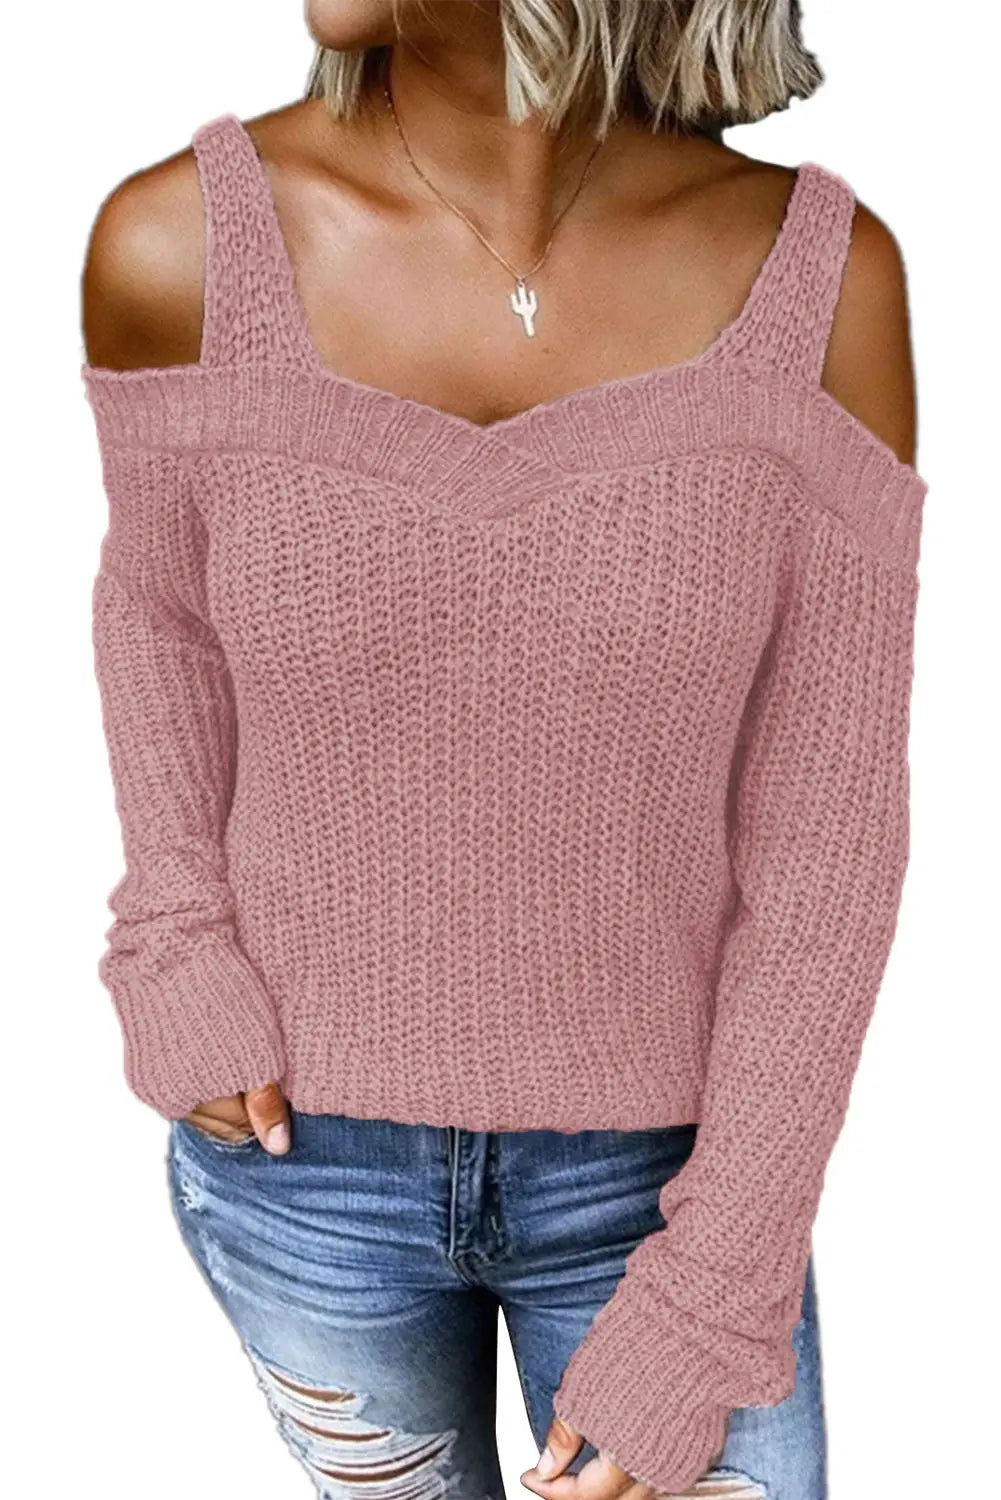 White dew shoulder knitted sweater - sweaters & cardigans